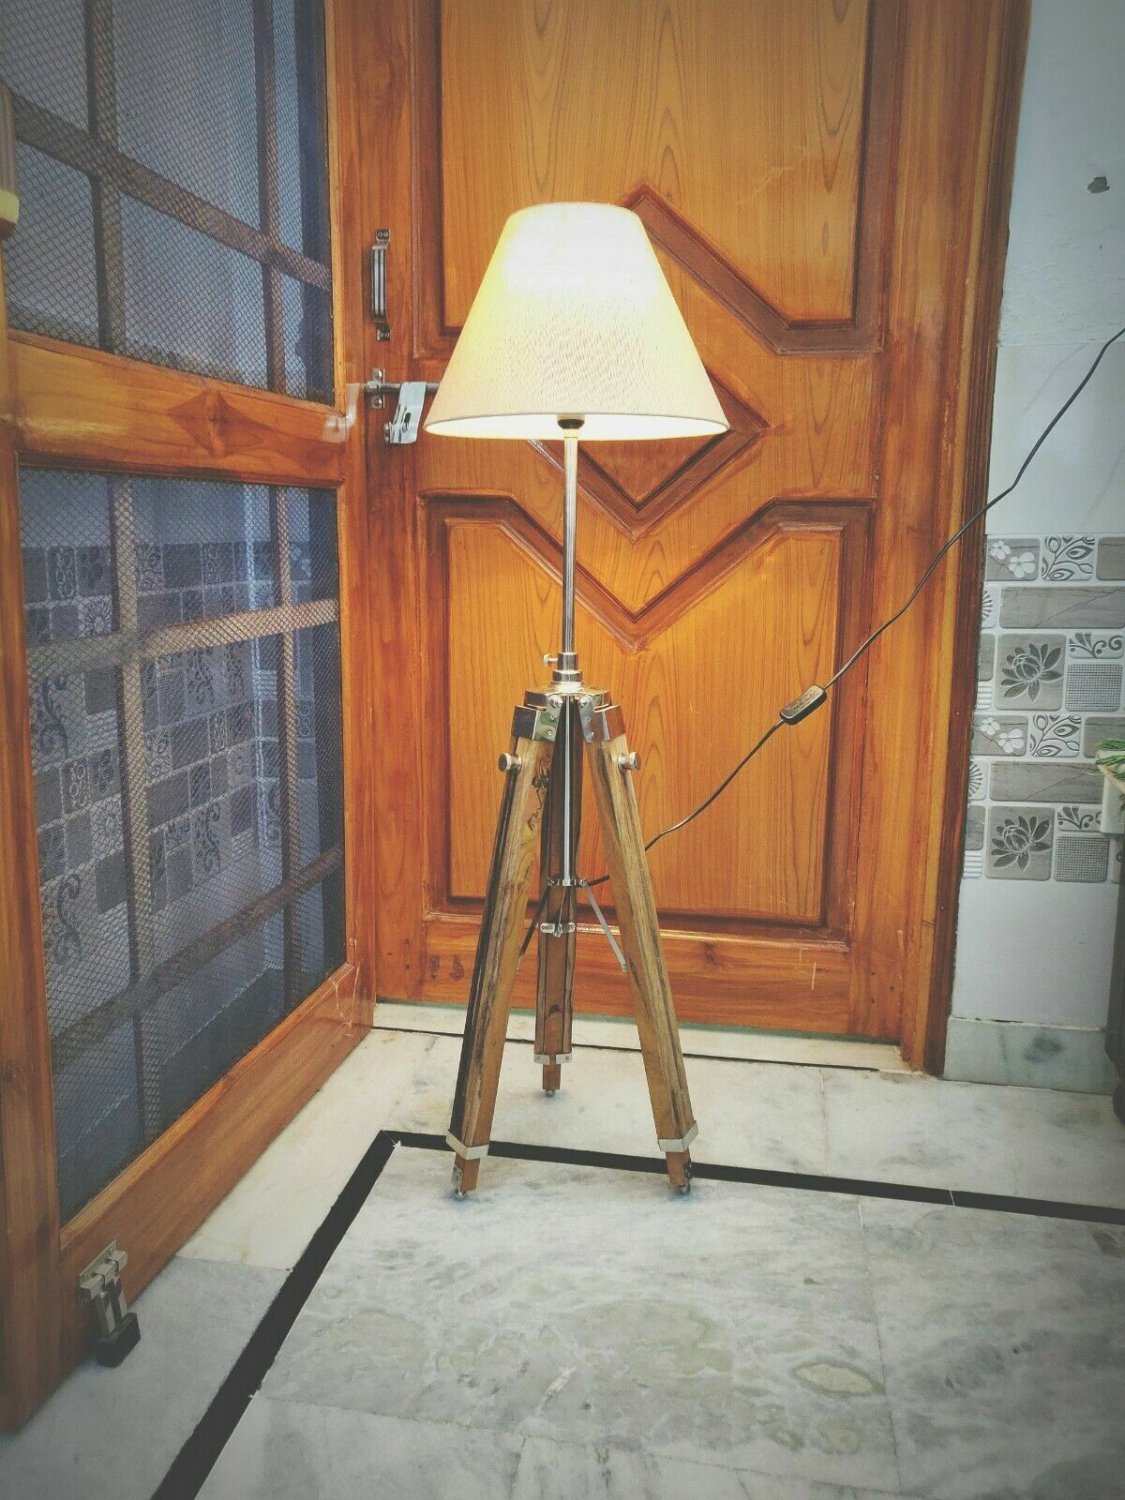 Vintage Nautical Tripod Floor Lamp Natural Teak Wooden Shade Stand Home Decor